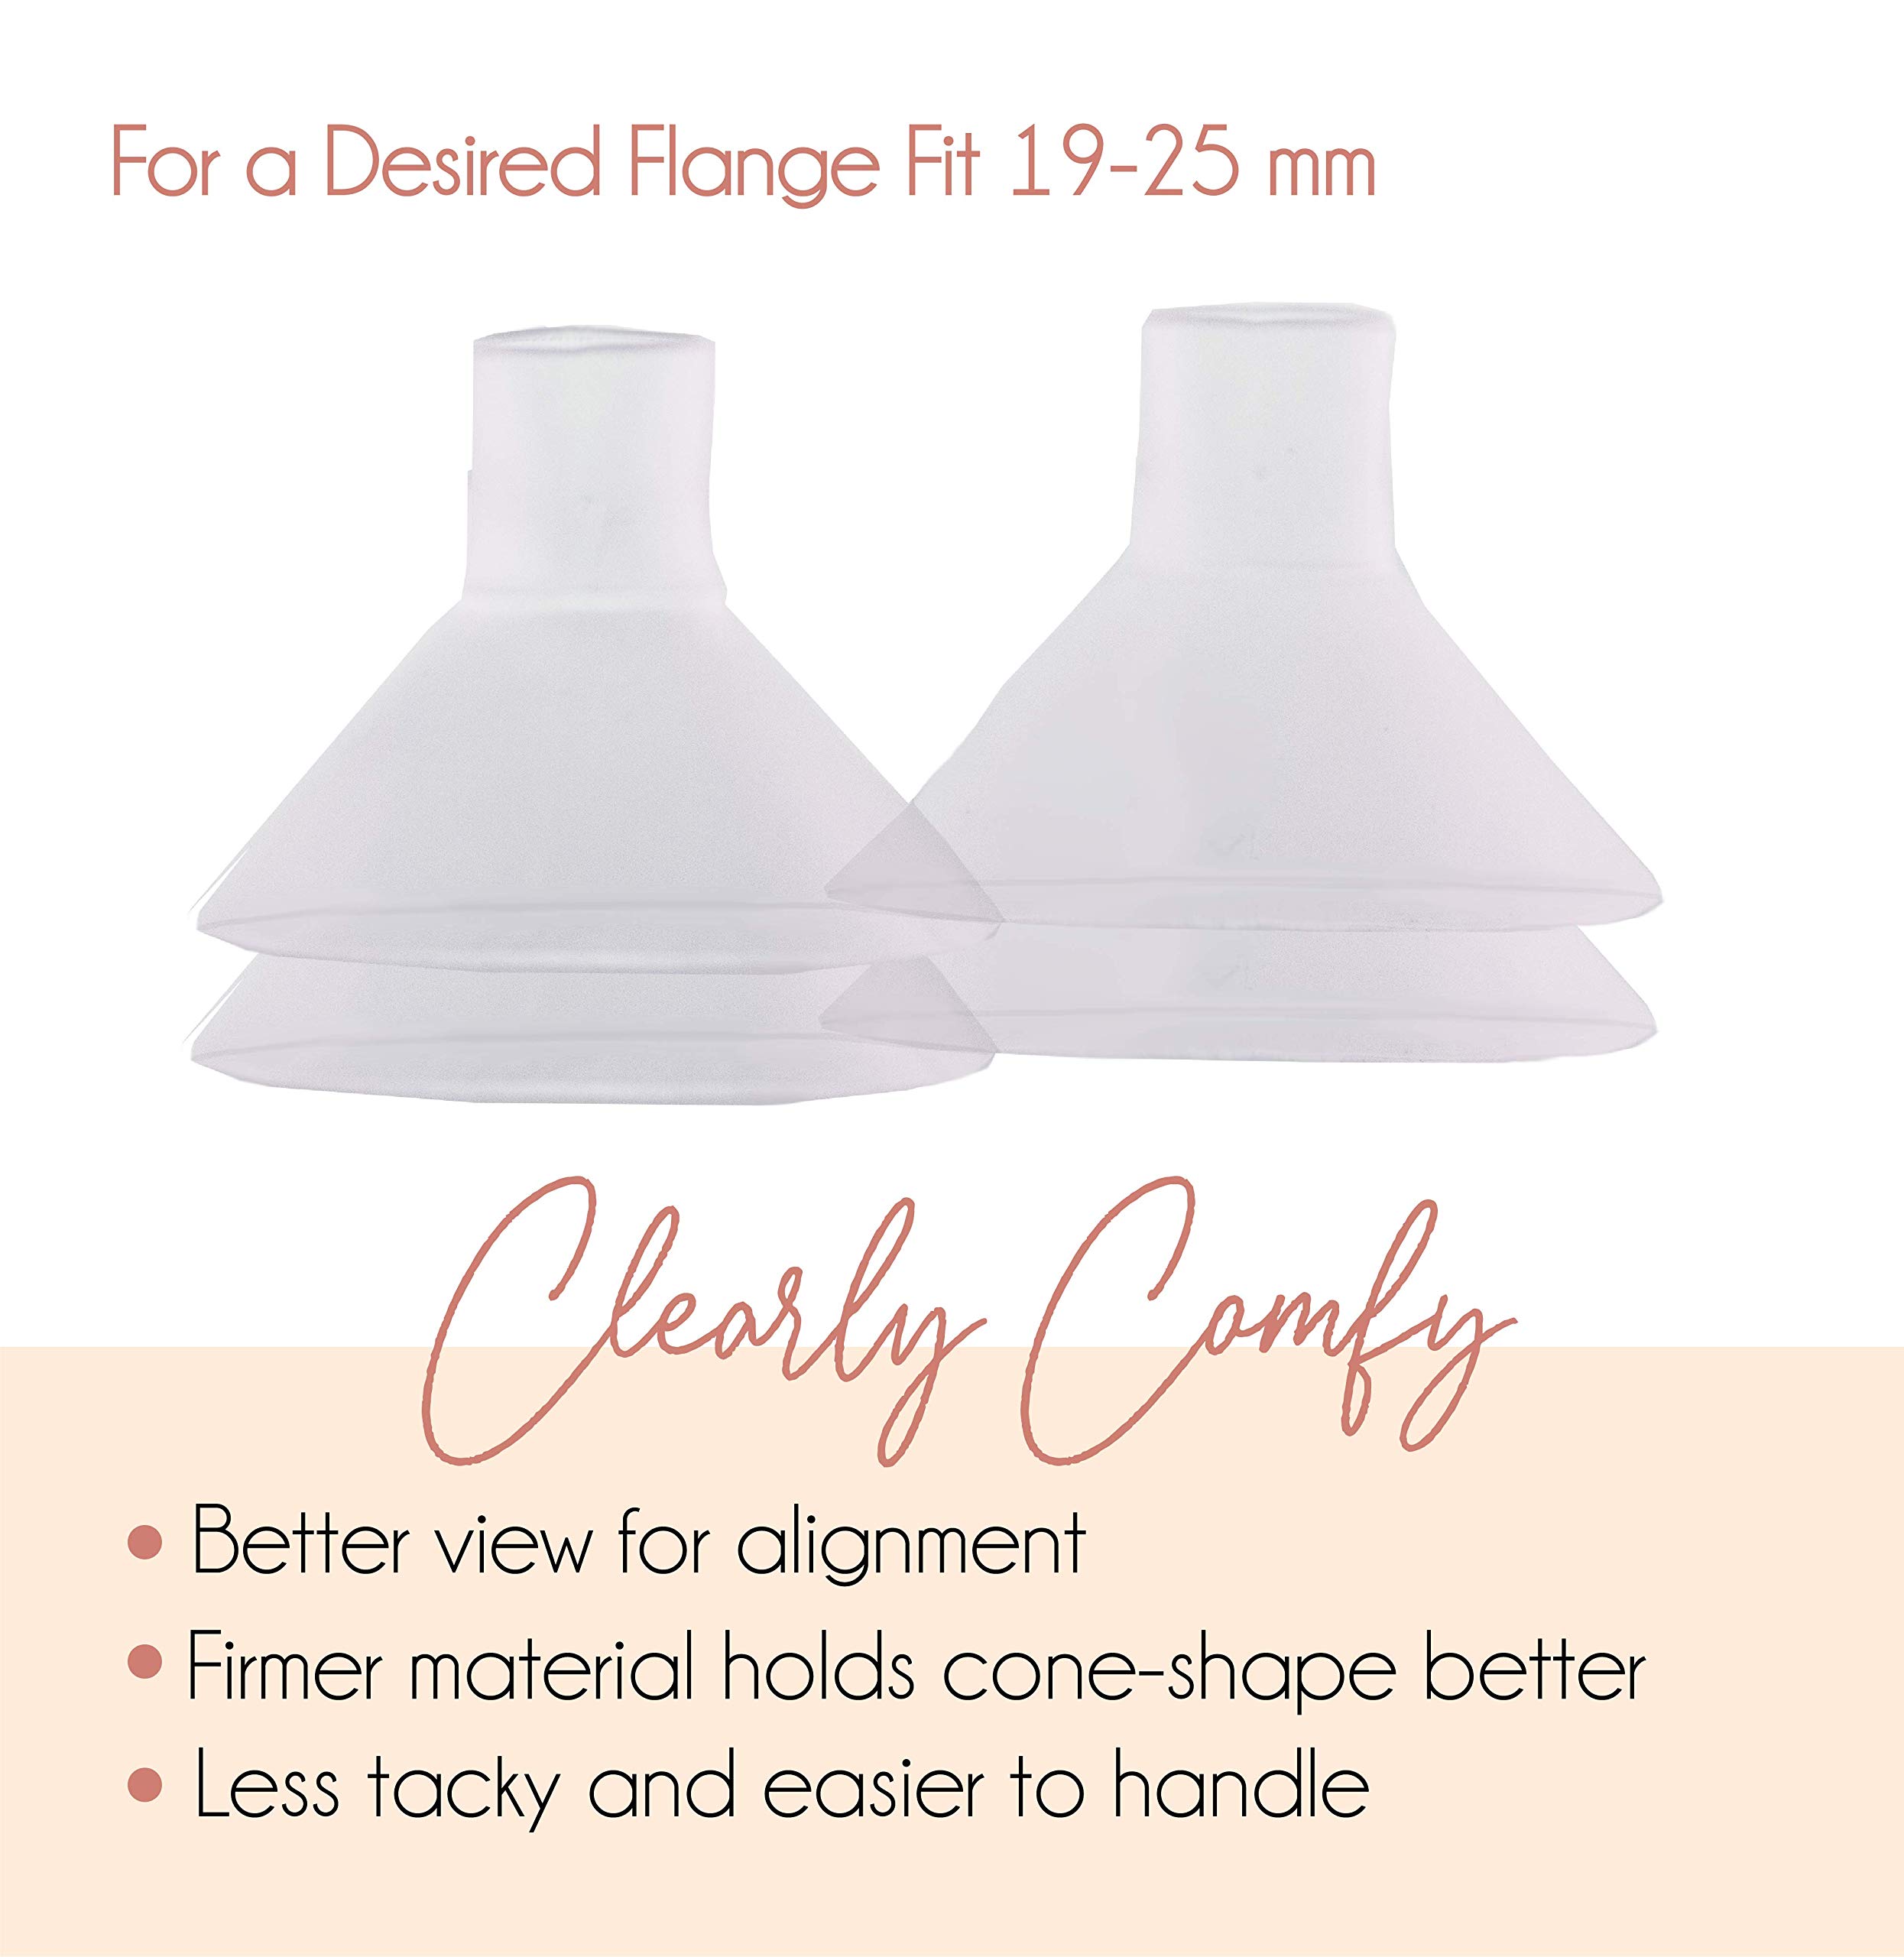 BeauGen Clearly Comfy Breast Pump Cushion – Soft, Stretchy, Clear, and Comfortable Flange Inserts for Improved Comfort and Fit – BPA Free, Food Safe Plastic (1 Pair)